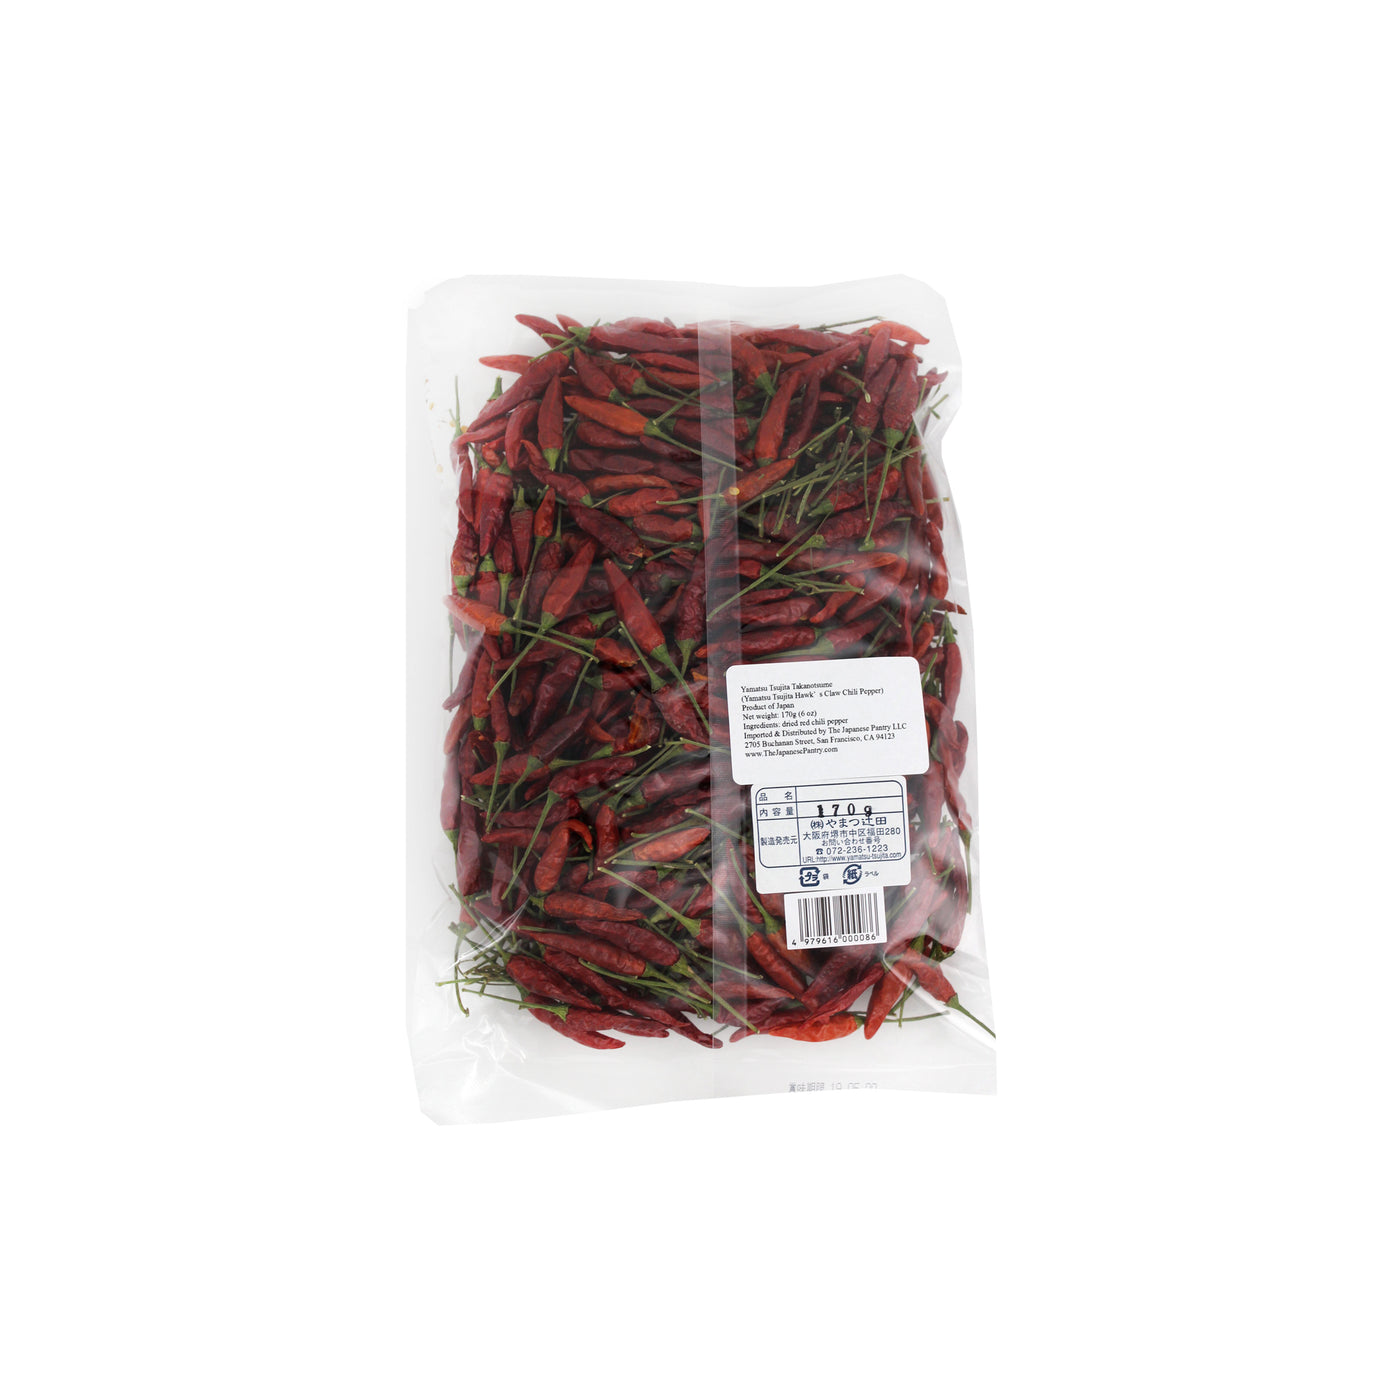 Takanotsume (Whole Dried Chili Peppers) - 170g